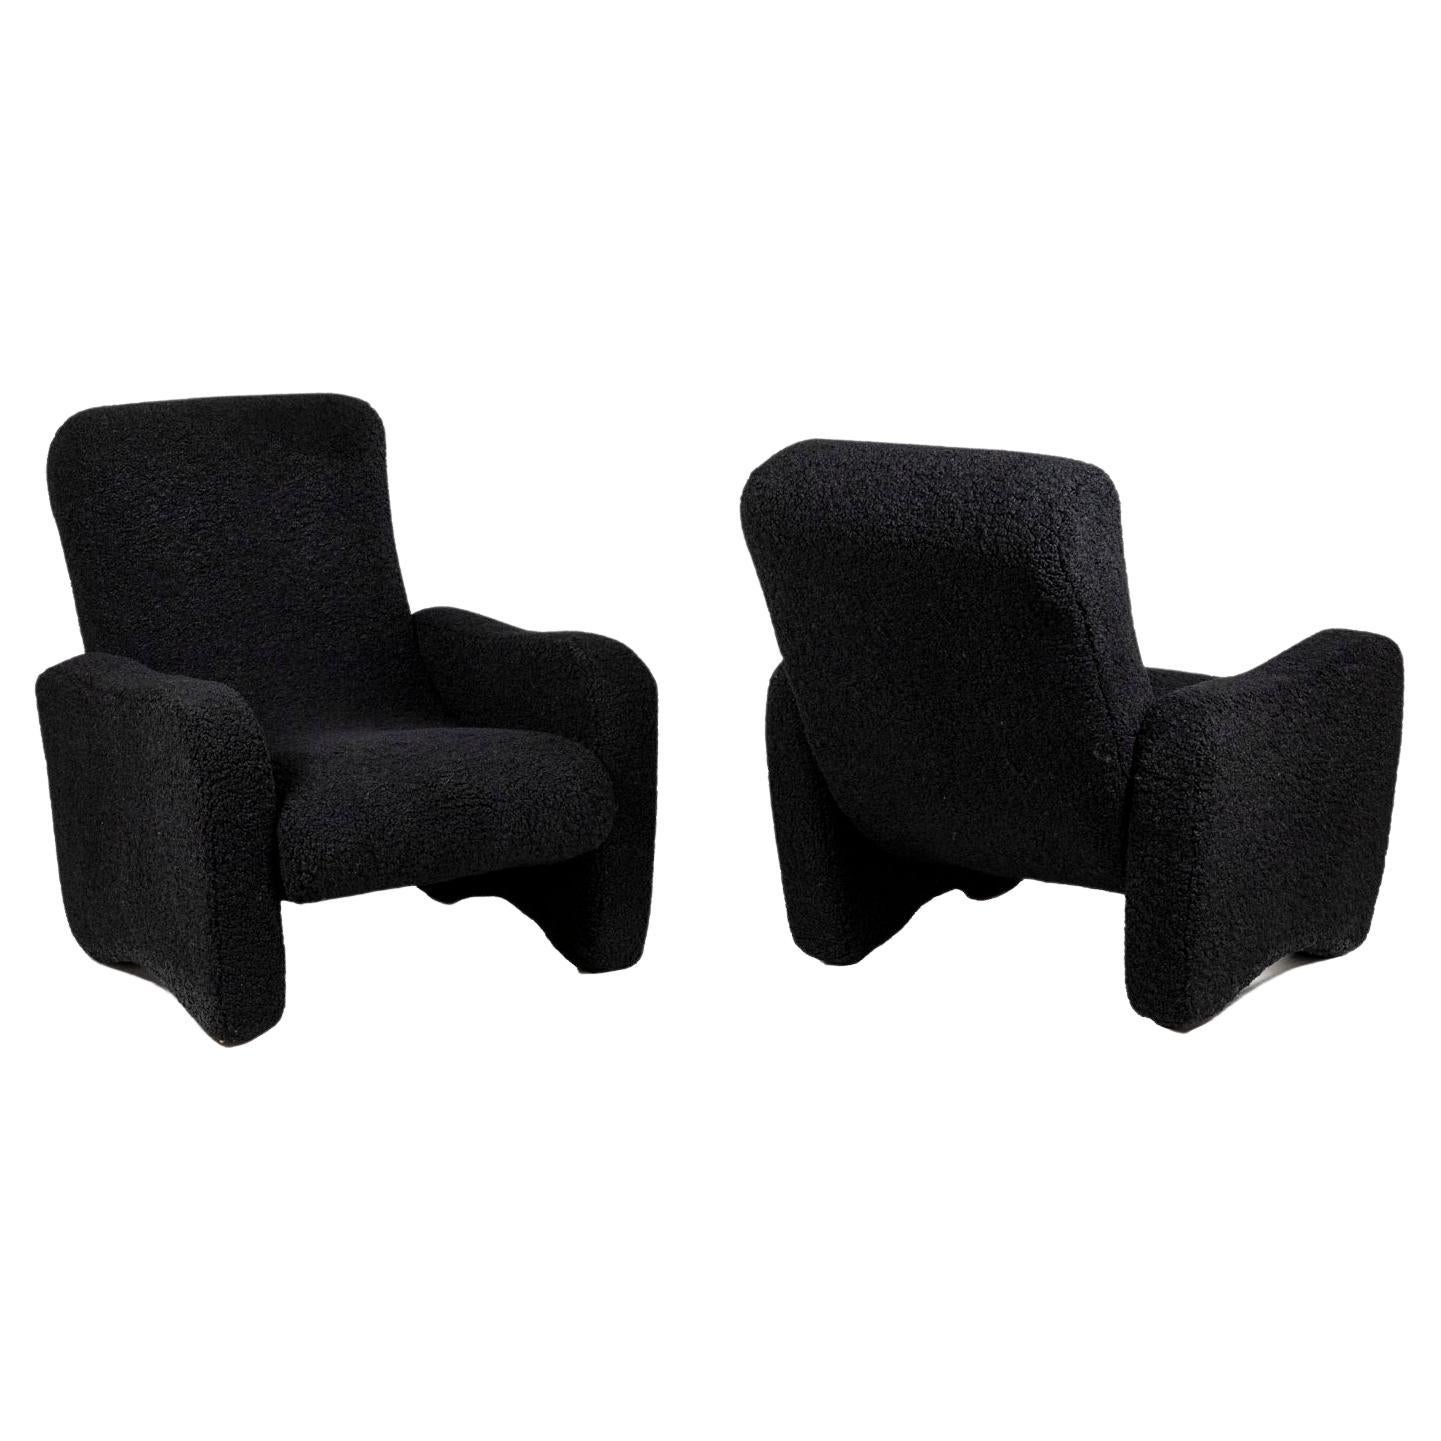 Pair of Armchairs “Lounge”, 1970s For Sale